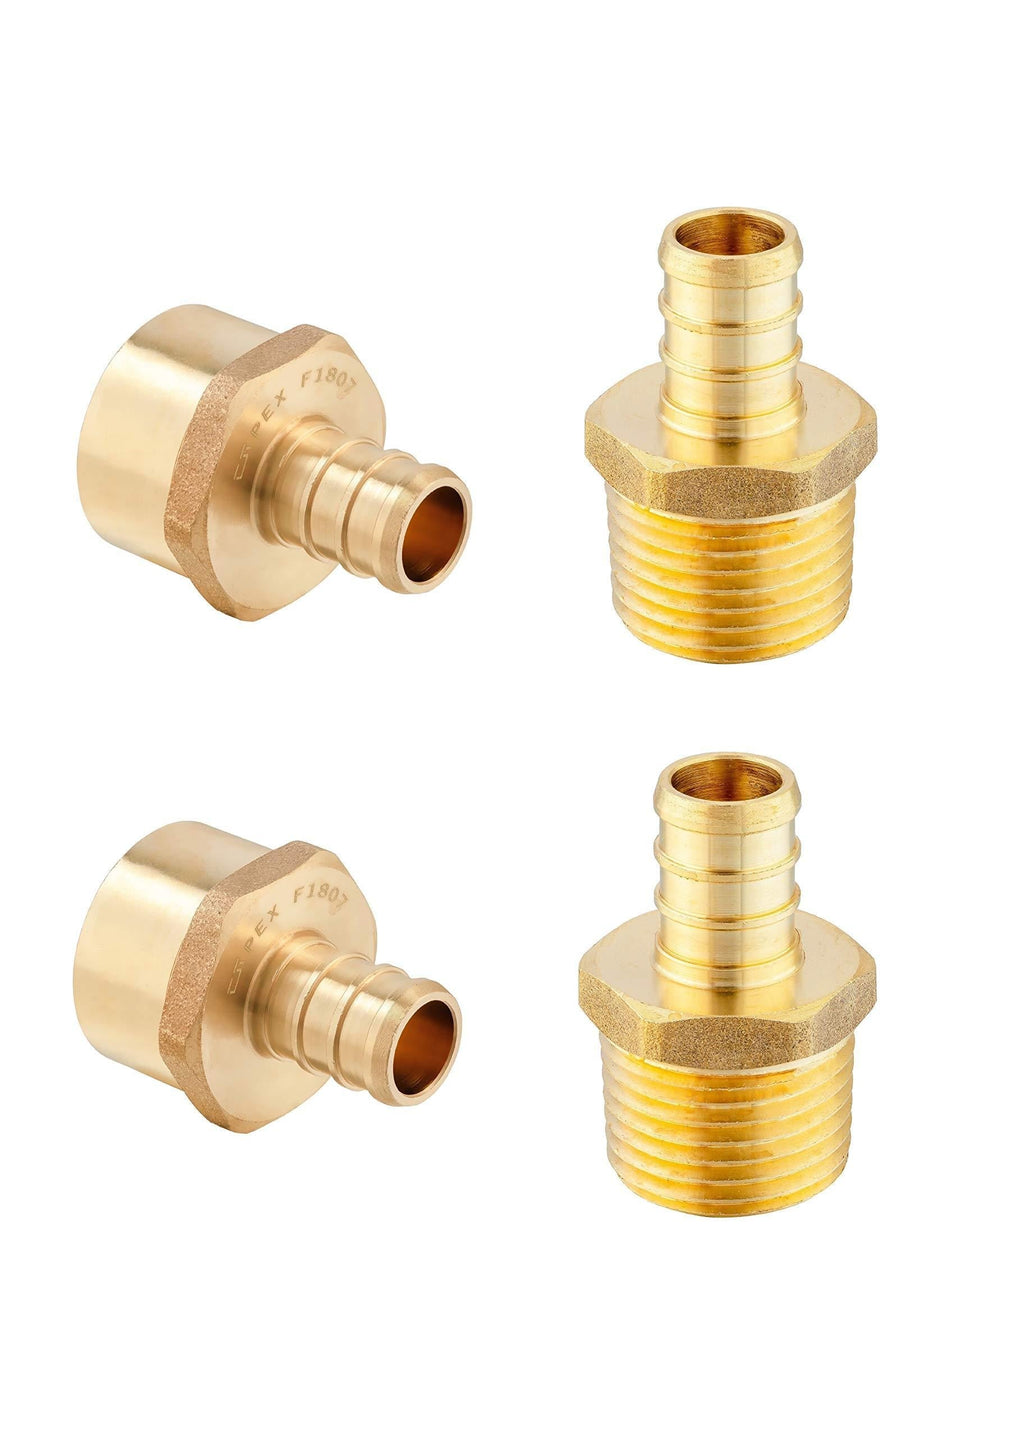 (Pack of 4) EFIELD Pex 1/2 Inch x 1/2 Inch NPT Male/Female (2 PCS/Each) Adapter Brass Crimp Fitting,DZR Lead free-4 Pieces - NewNest Australia